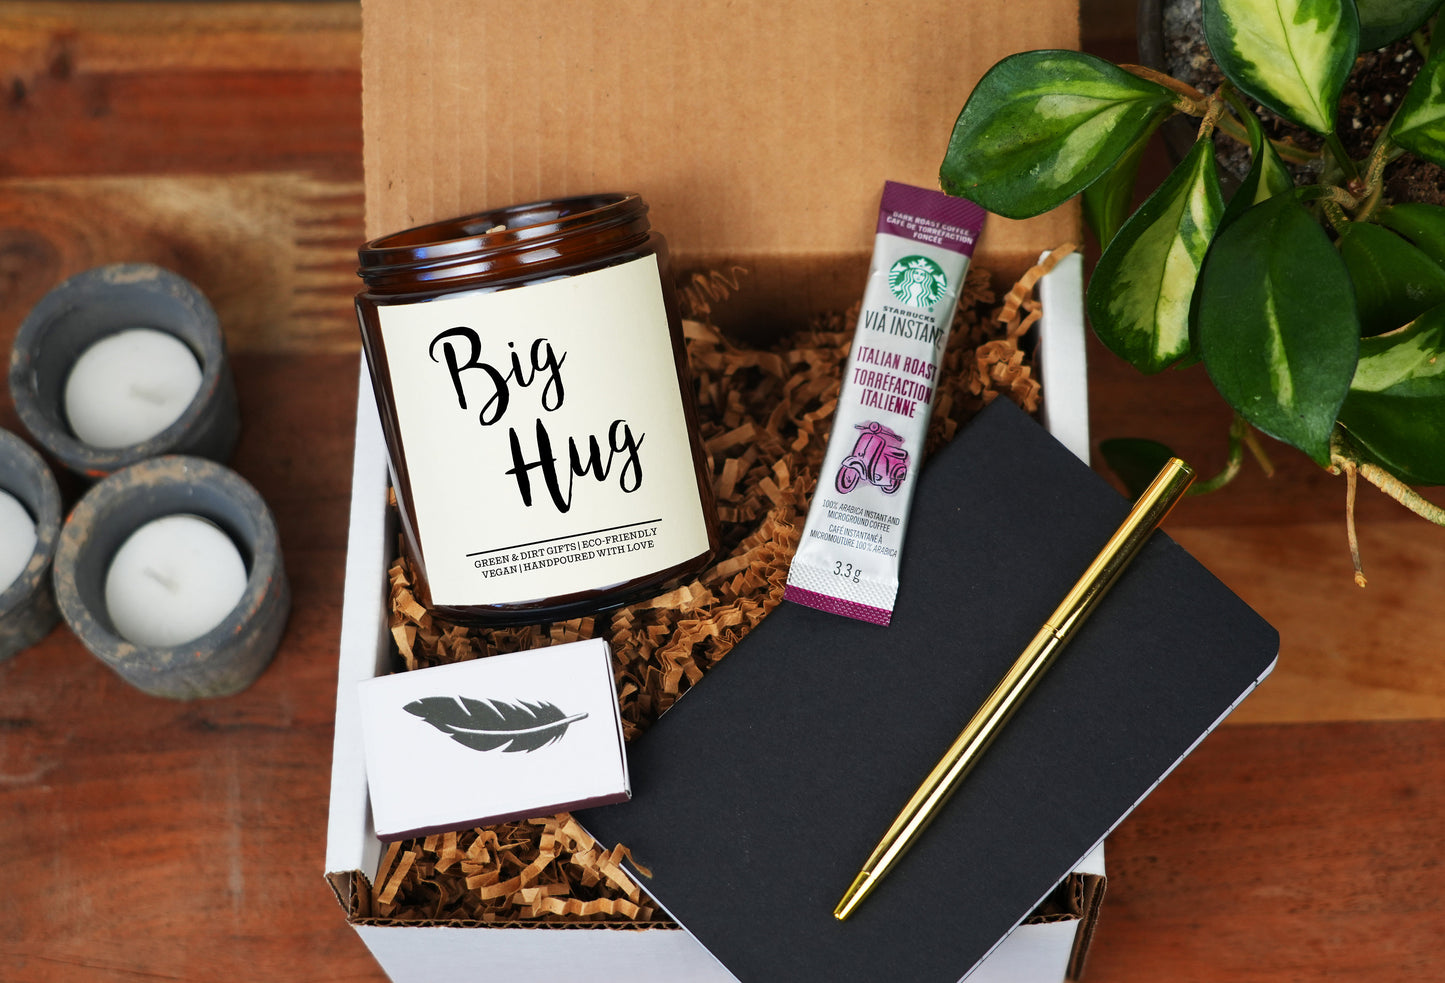 Big Hug Thank you gift box -9oz Candle -Self Care Gift Box, Care Package For Her, Gift Baskets for Women, New Mom Gift Basket, Get Well Soon